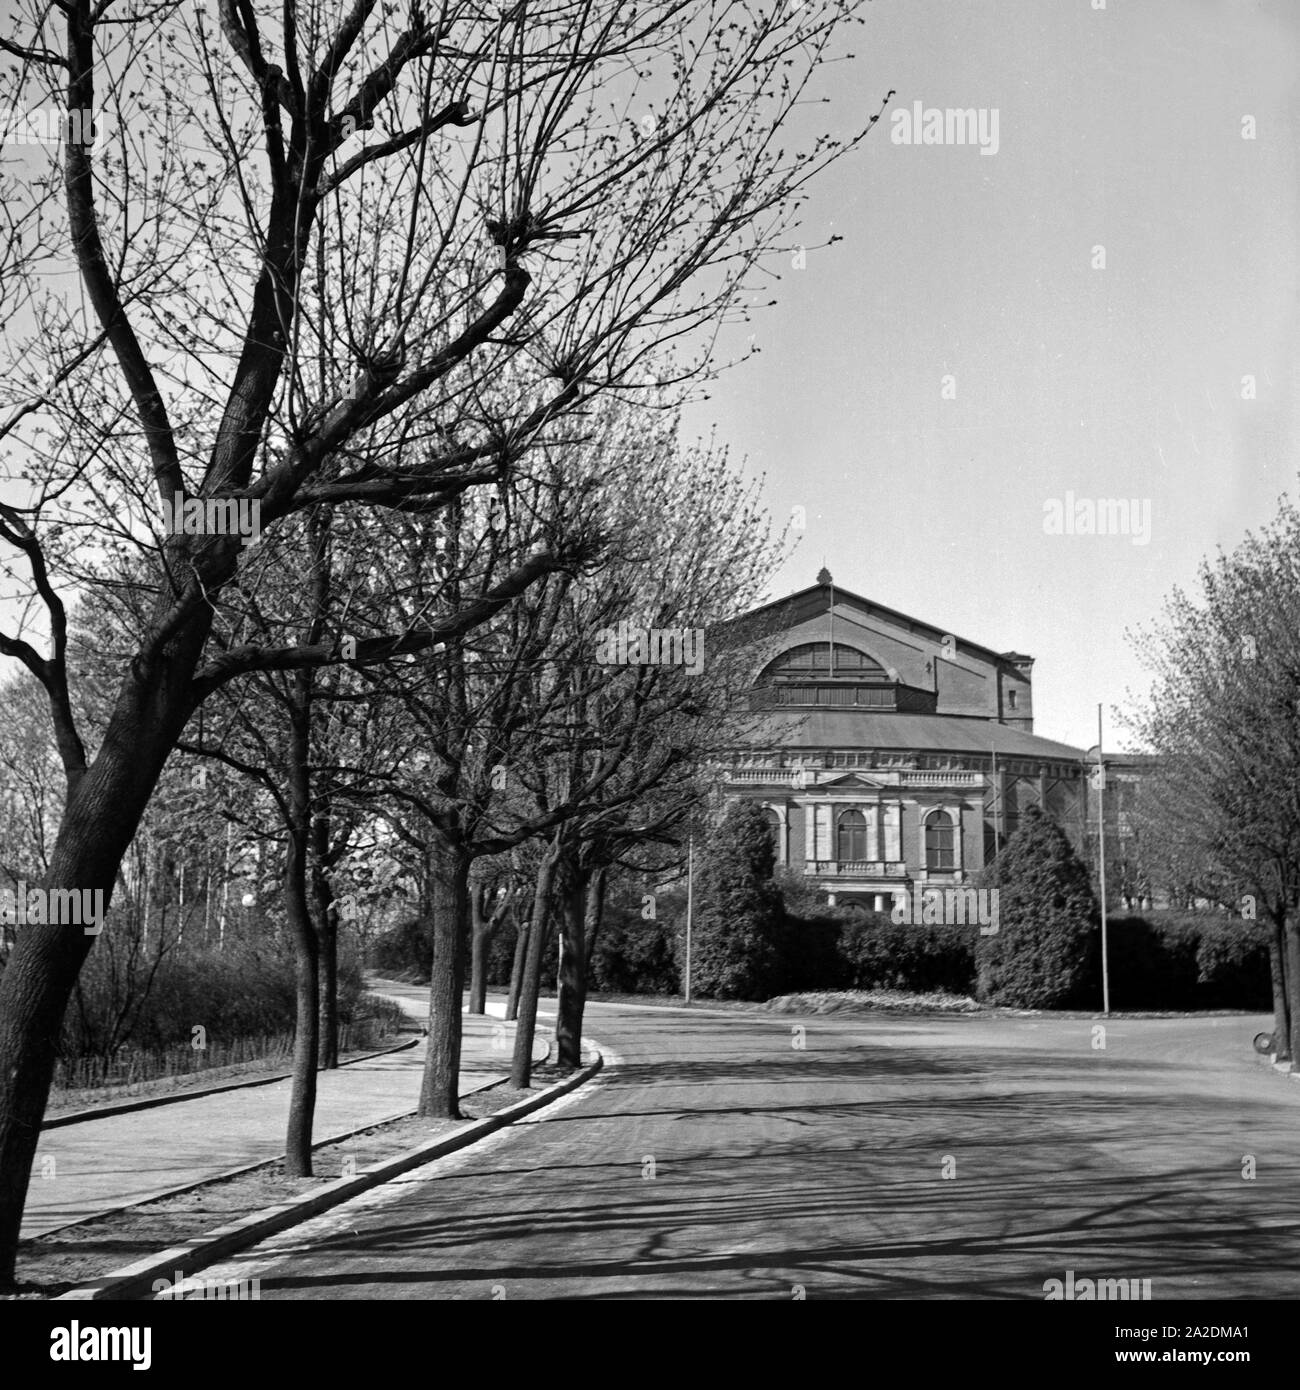 Festspielhaus Black and White Stock Photos & Images - Alamy